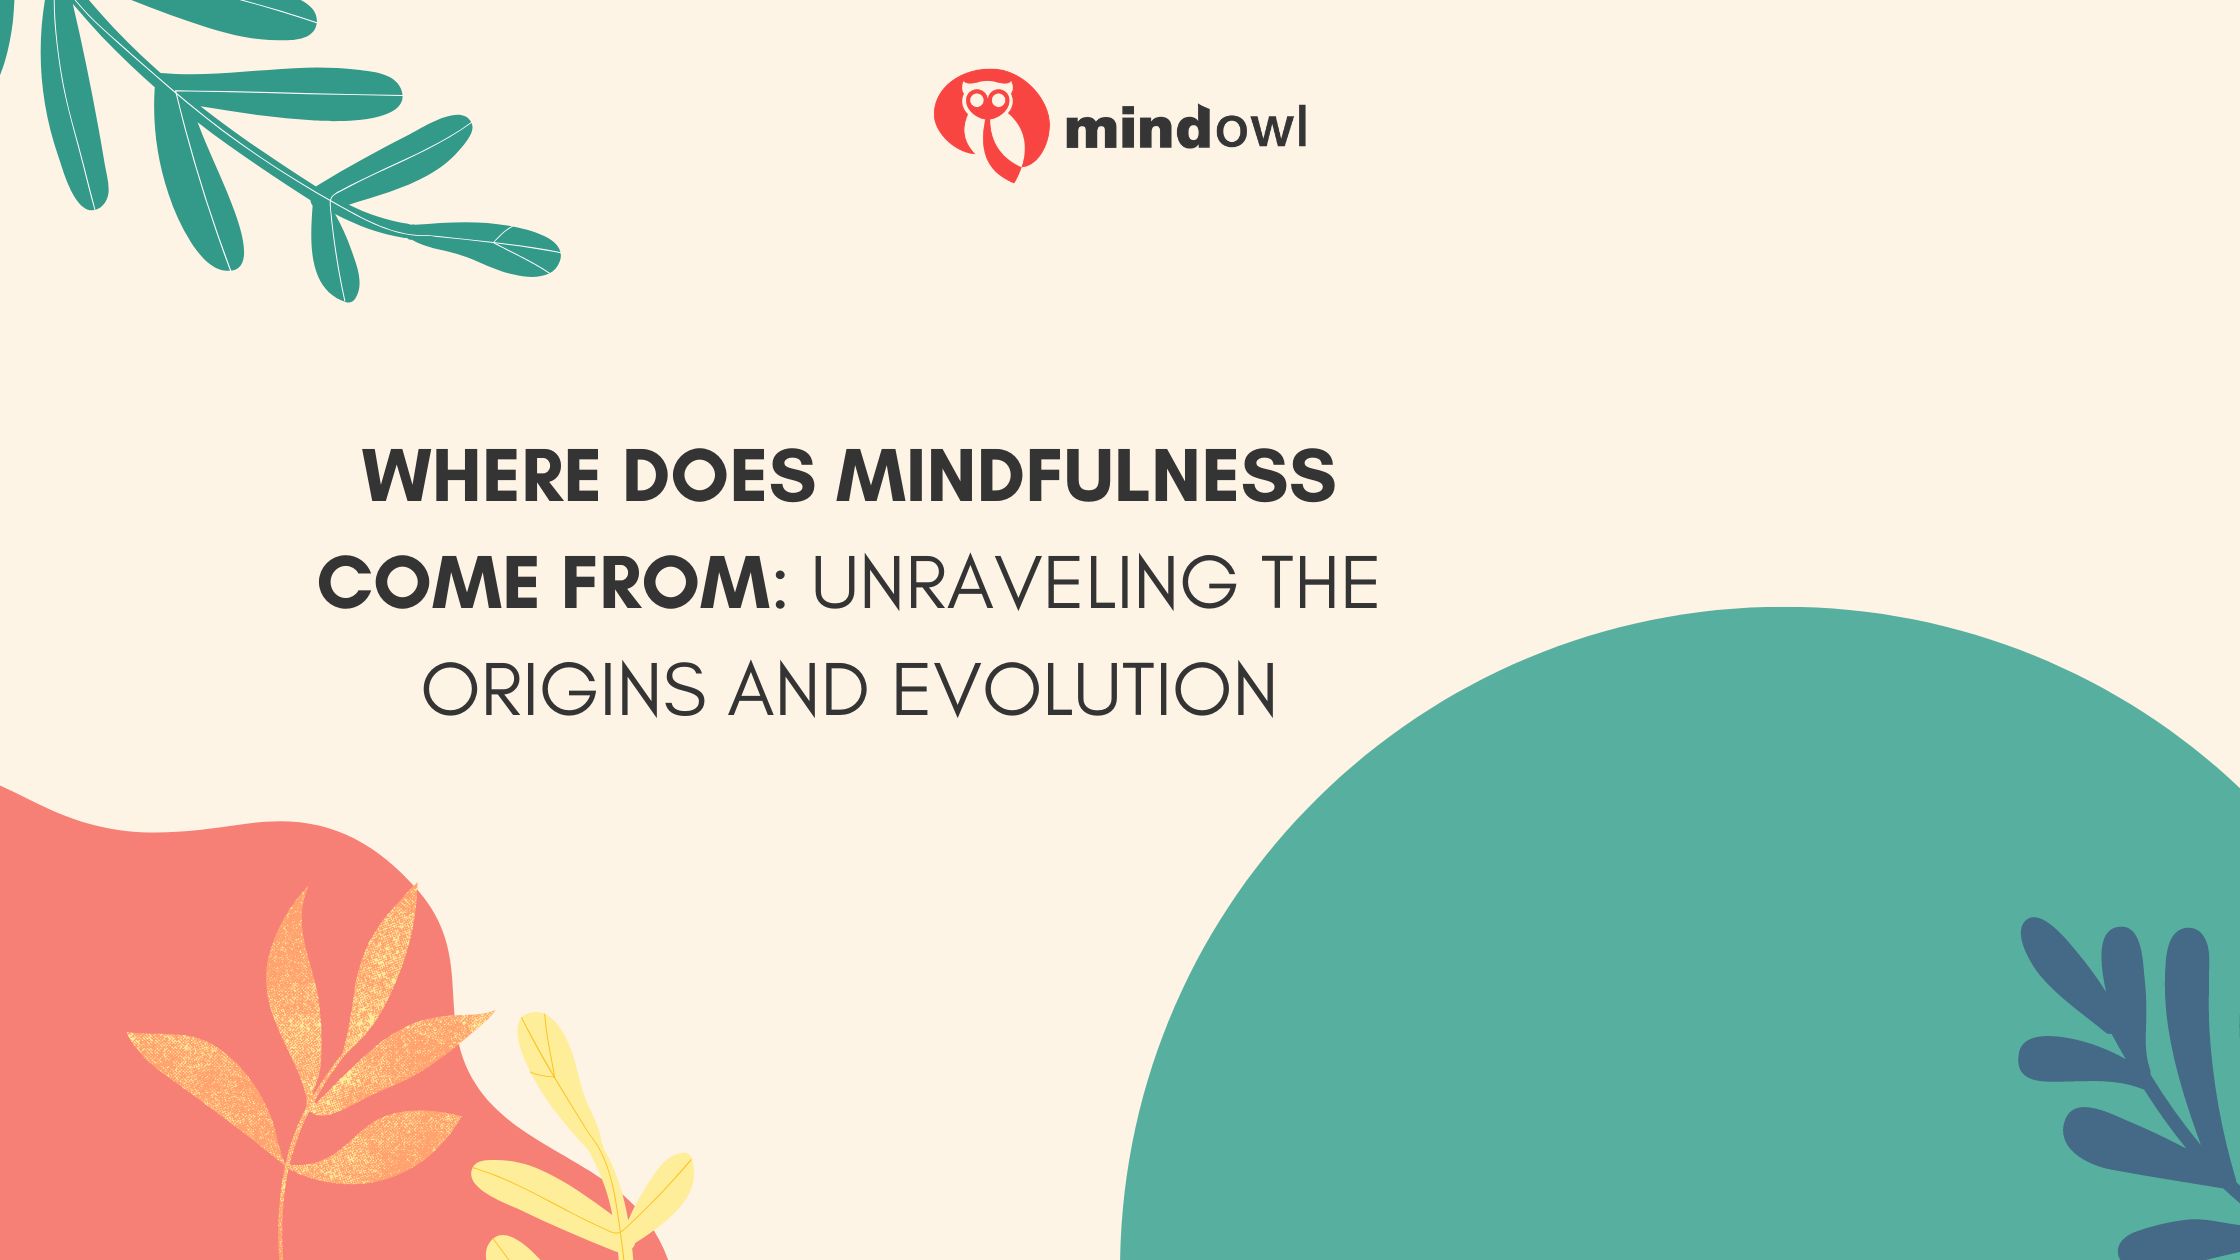 Where Does Mindfulness Come From: Unraveling The Origins And Evolution